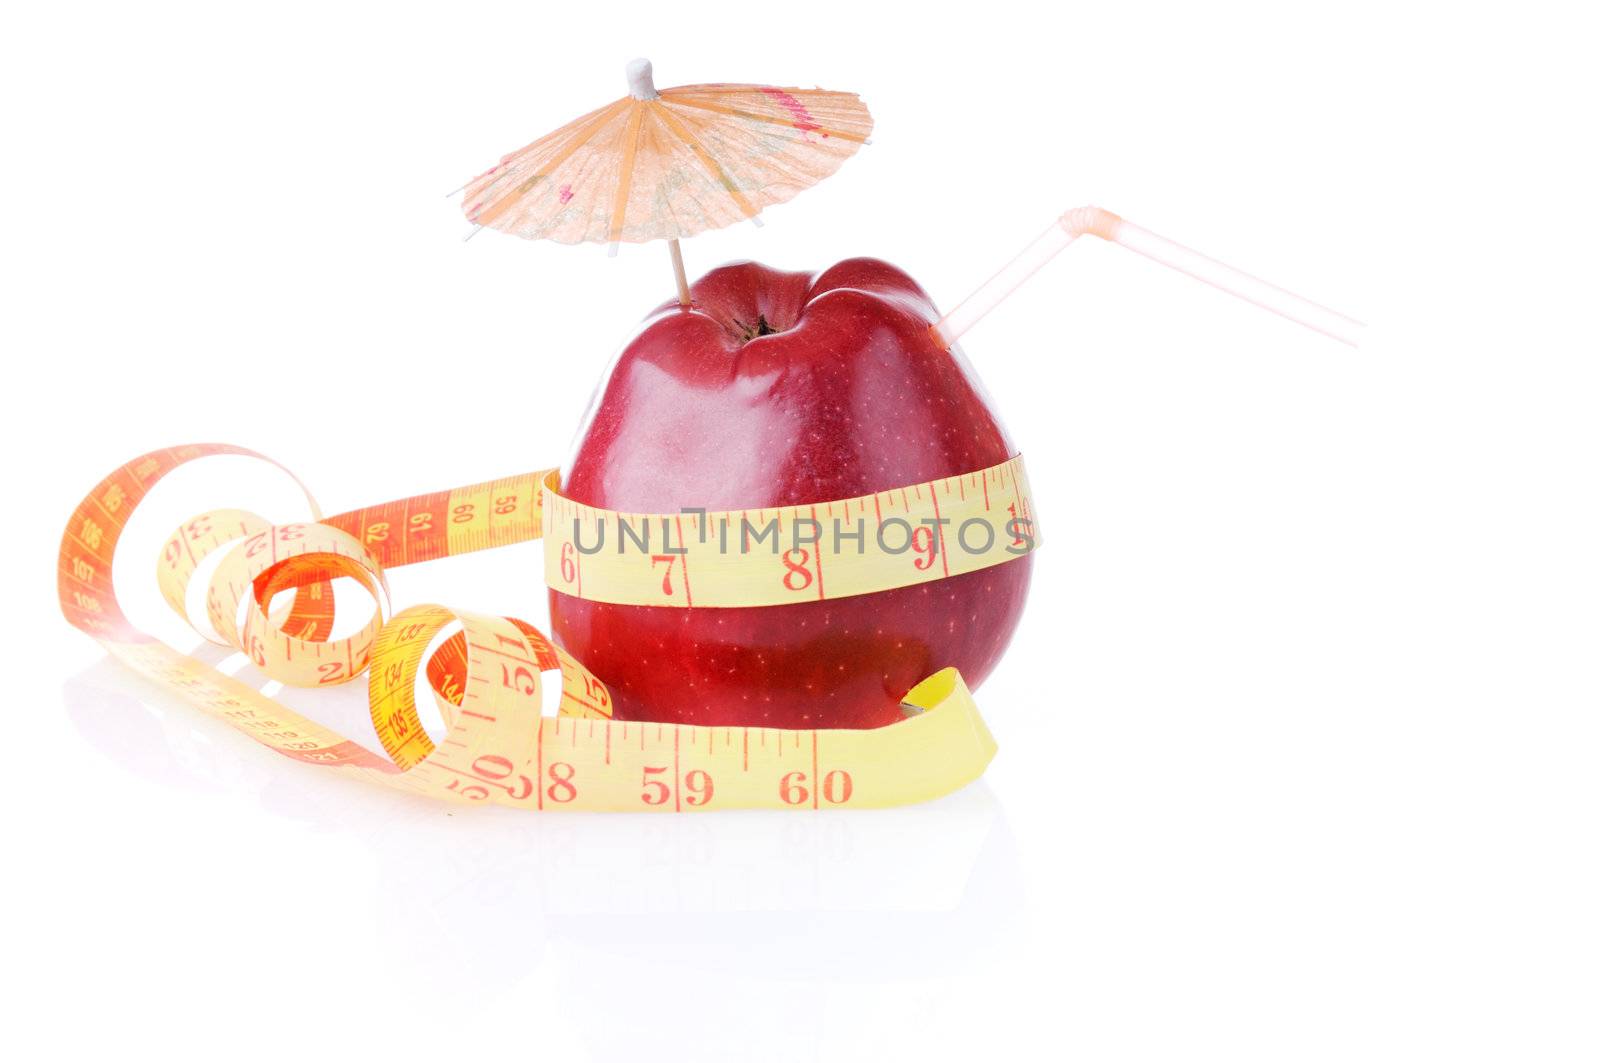 Red apple with tube and umbrella is measure by type with 60